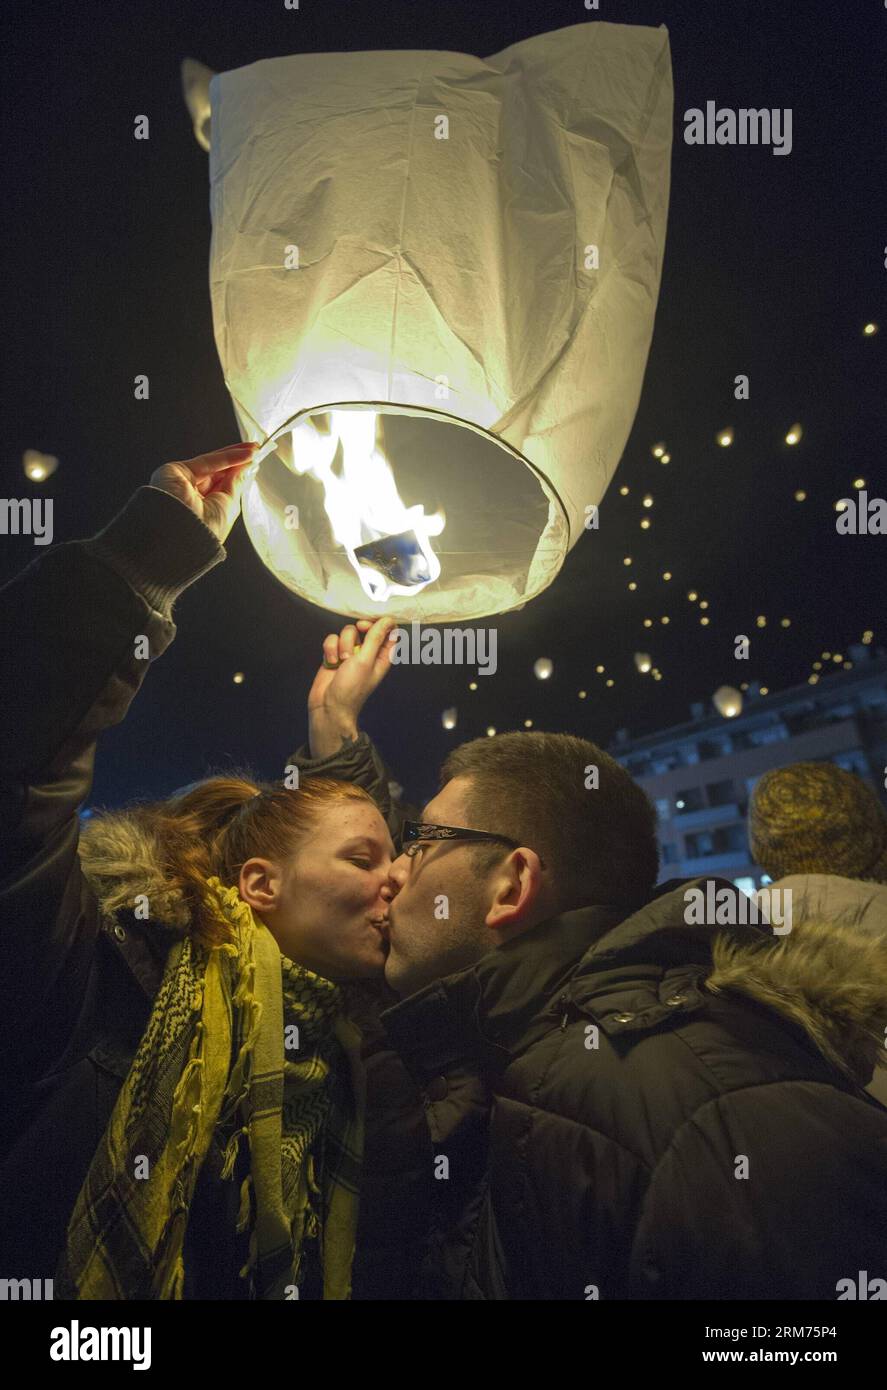 A couple kiss during the Lampionovo Lantern Festival in Zapresic, Croatia, Feb. 14, 2014. People released lanterns carrying their hopes and best wishes during the festival on Friday, and signed a huge Valentine s Day card to their twin town of Kastela. (Xinhua/Miso Lisanin) (zhf) CROATIA-ZAPRESIC-LANTERN FESTIVAL PUBLICATIONxNOTxINxCHN   a COUPLE Kiss during The  Lantern Festival in  Croatia Feb 14 2014 Celebrities released Lanterns carrying their Hopes and Best wishes during The Festival ON Friday and signed a Huge Valentine S Day Card to their Twin Town of Kastela XINHUA Miso   Croatia  Lant Stock Photo